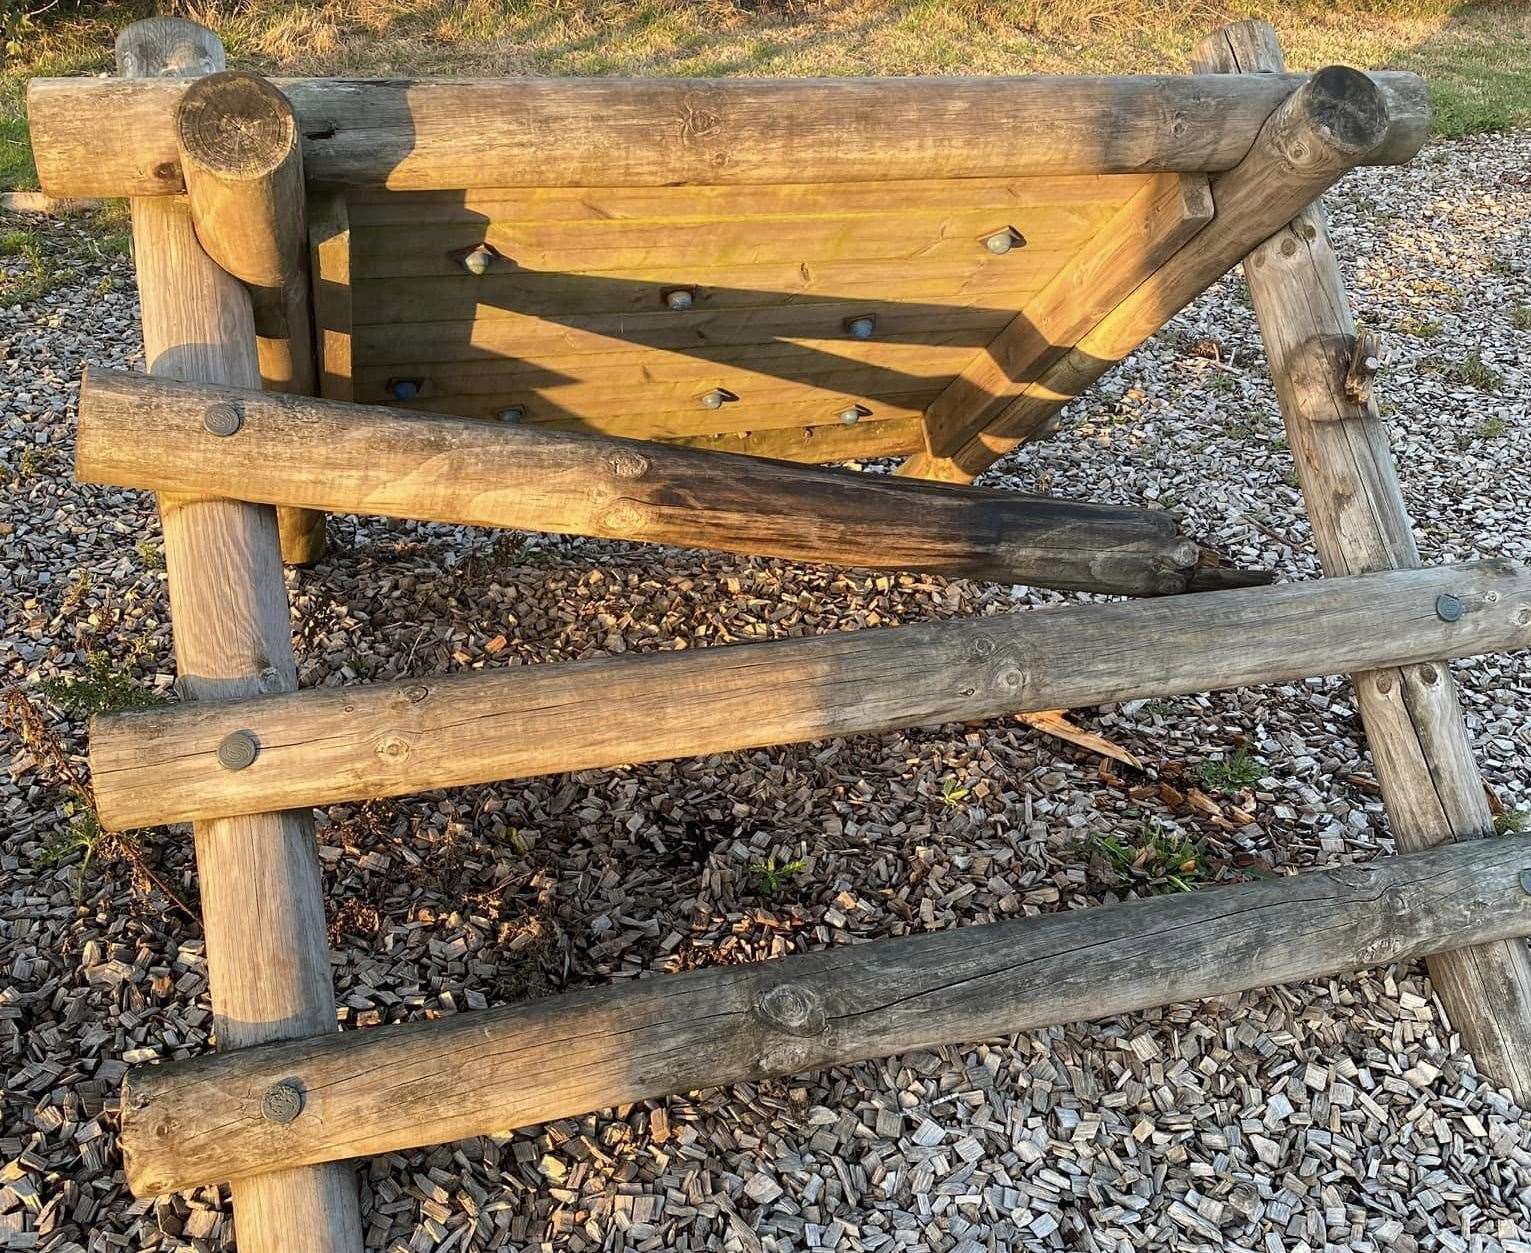 The grandmother says if someone had played on this wooden climbing frame, it could have ended dangerously